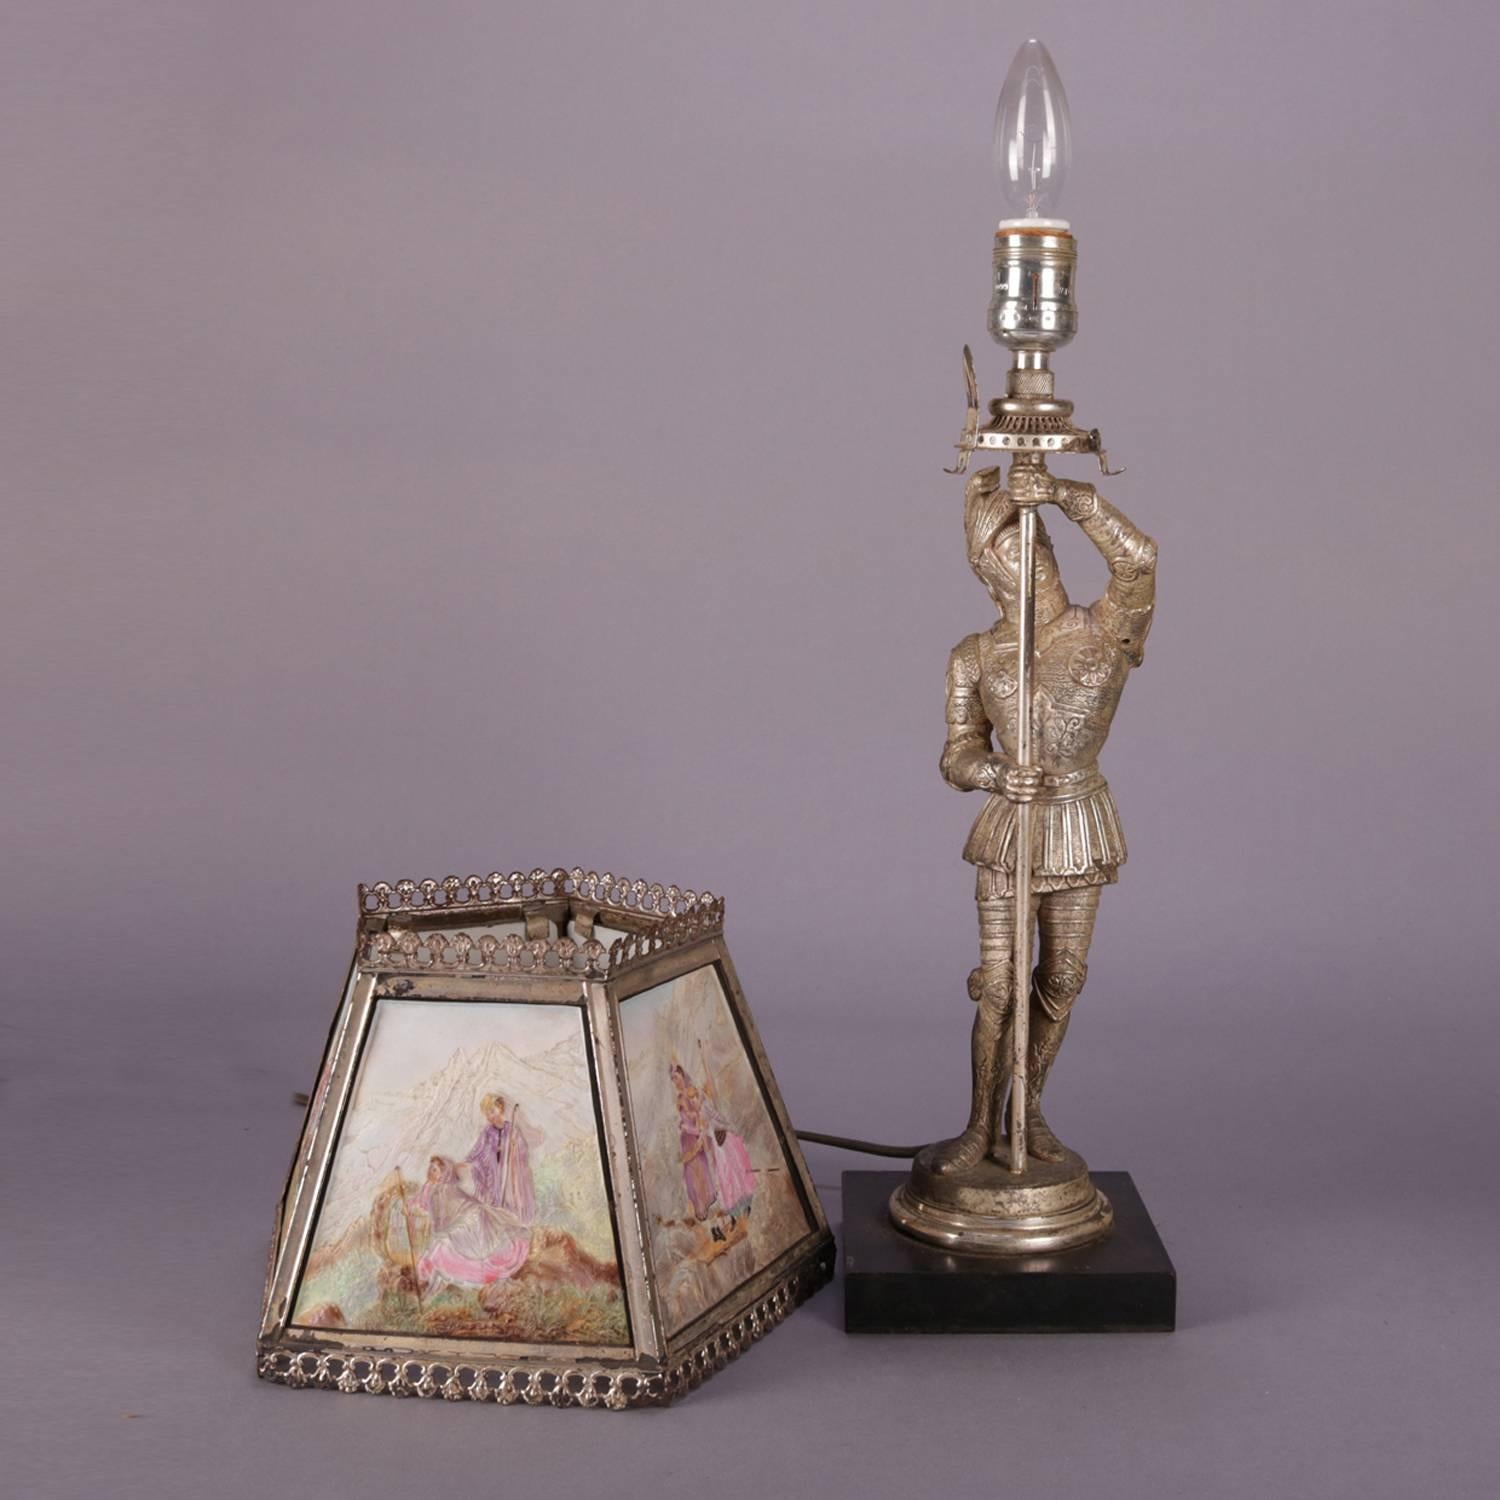 Antique English figural lithophane table lamp features base with full length portrait sculpture of knight in shining armor, shade with five painted lithophane panels depicting genre and landscape scenes, circa 1900.

Measures: 21